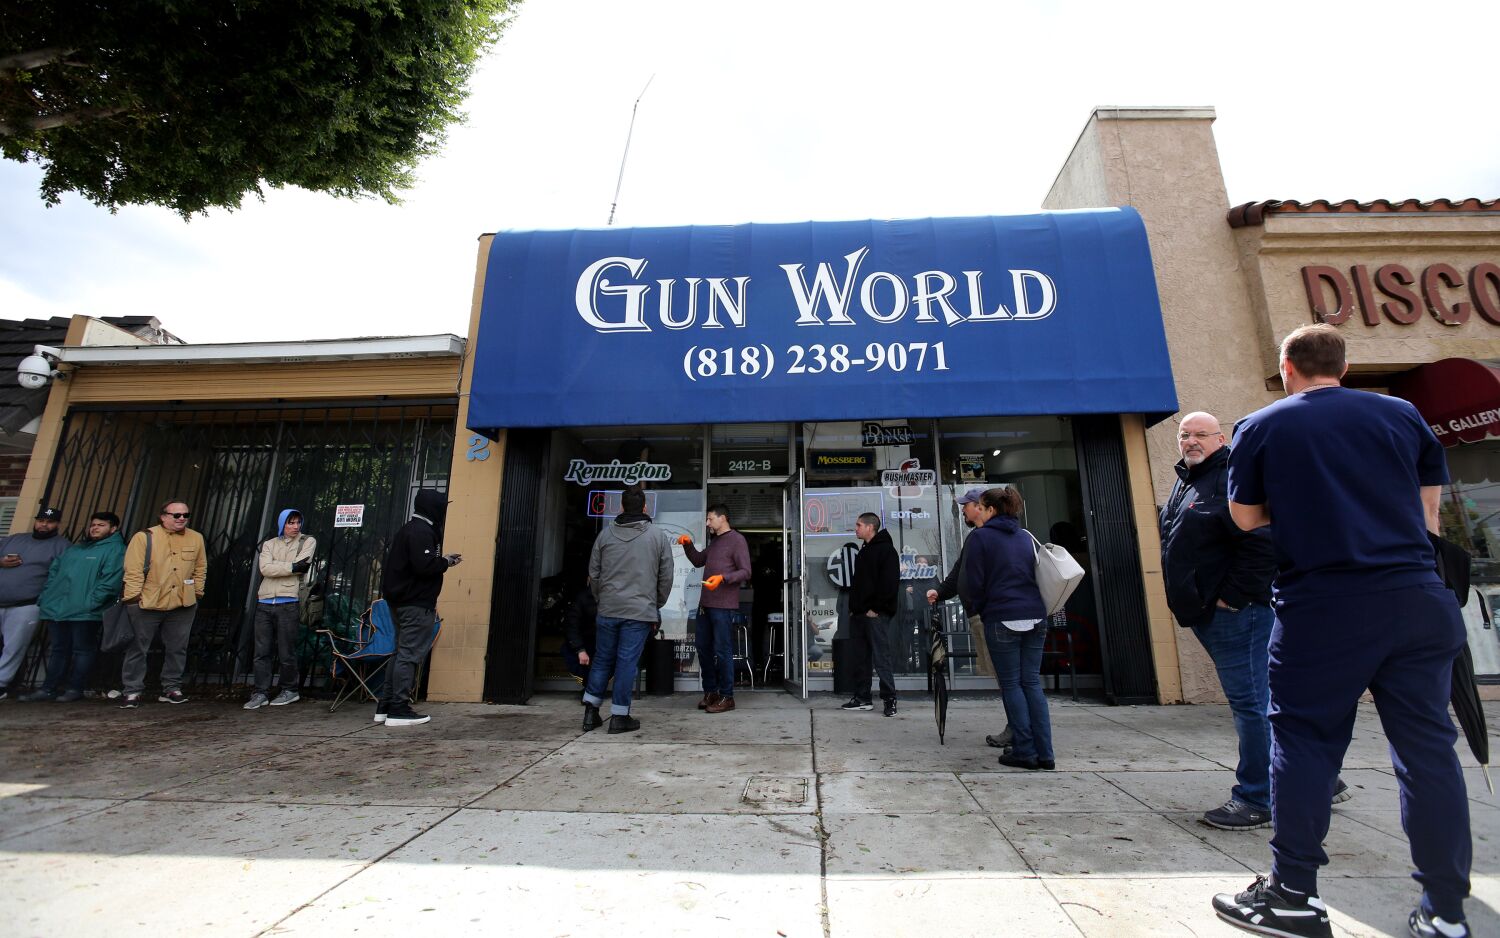 Granderson: Of course authorities should be alerted about spending sprees at gun stores